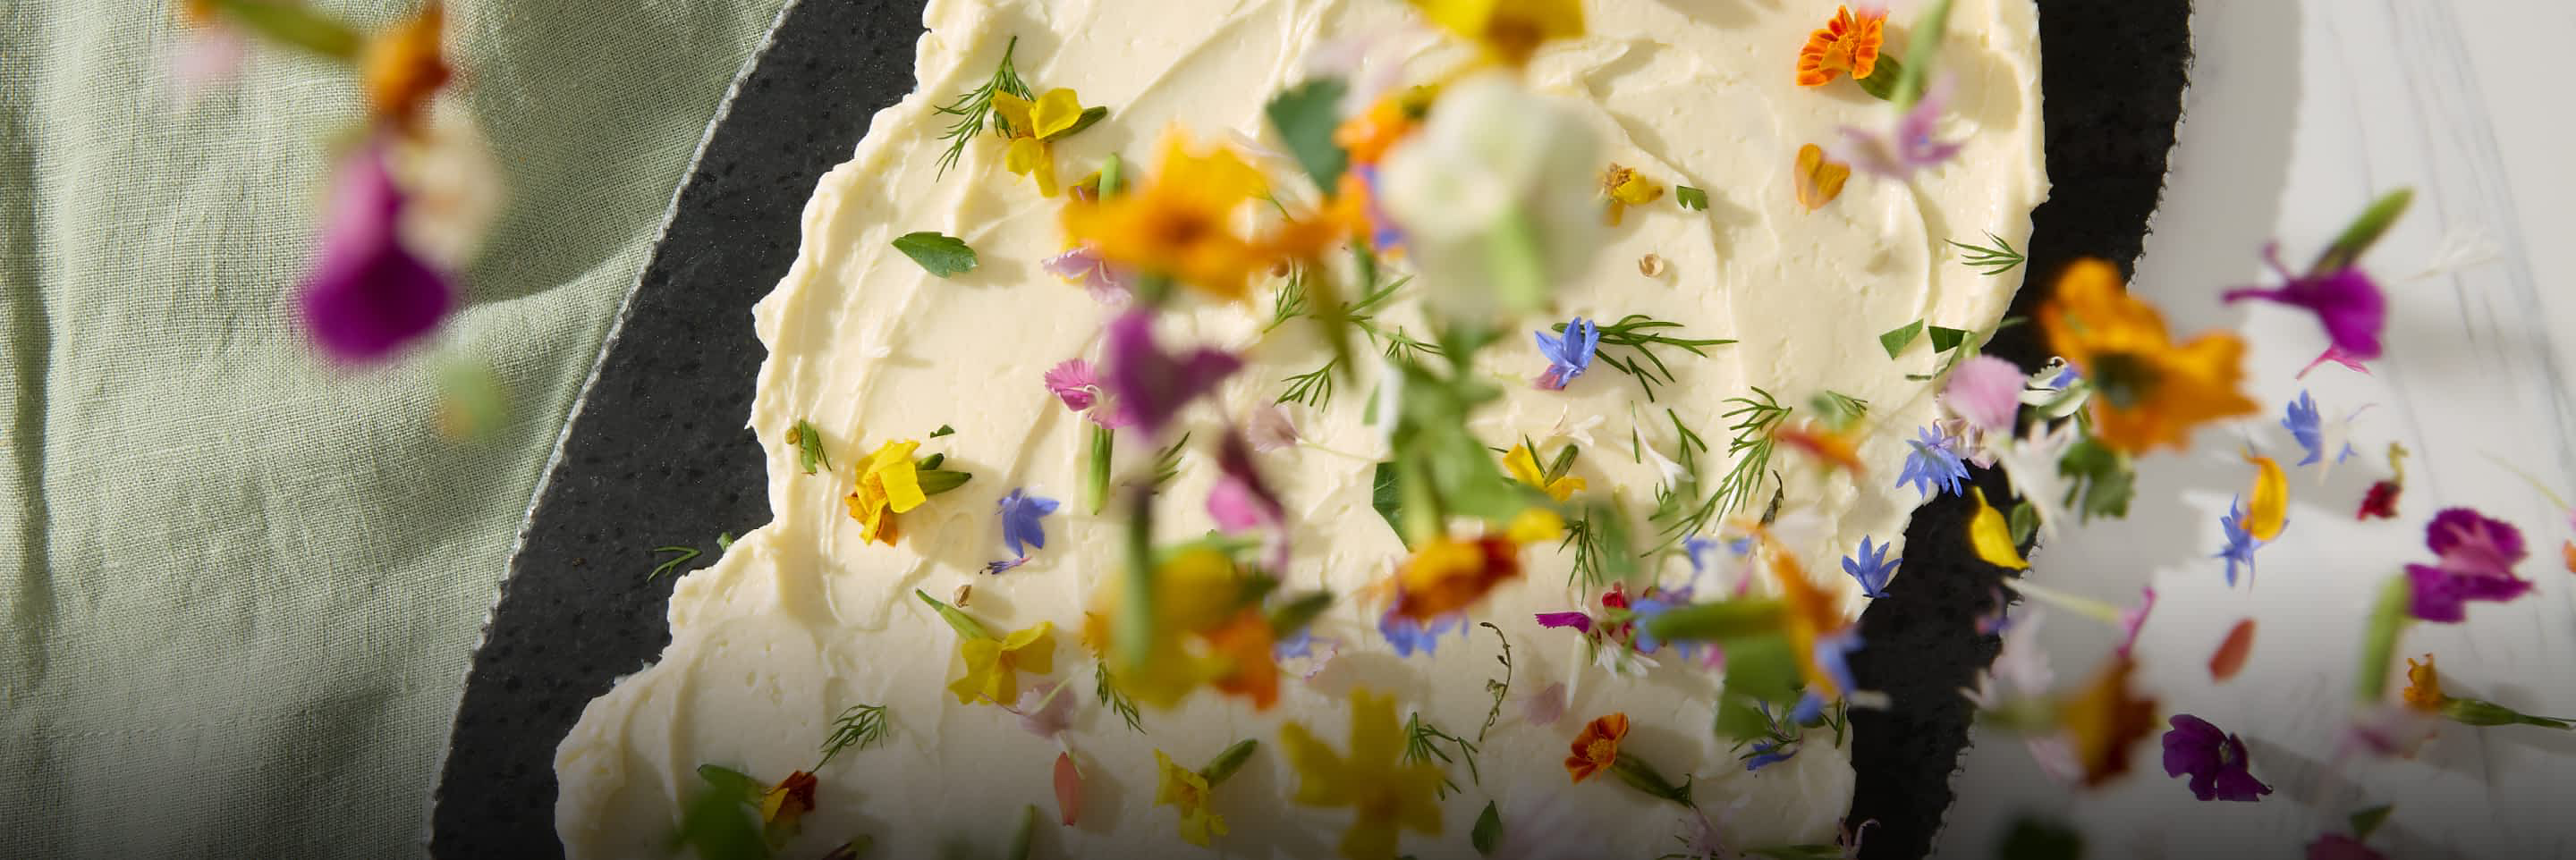 Edible flower petals being sprinkled onto butter.